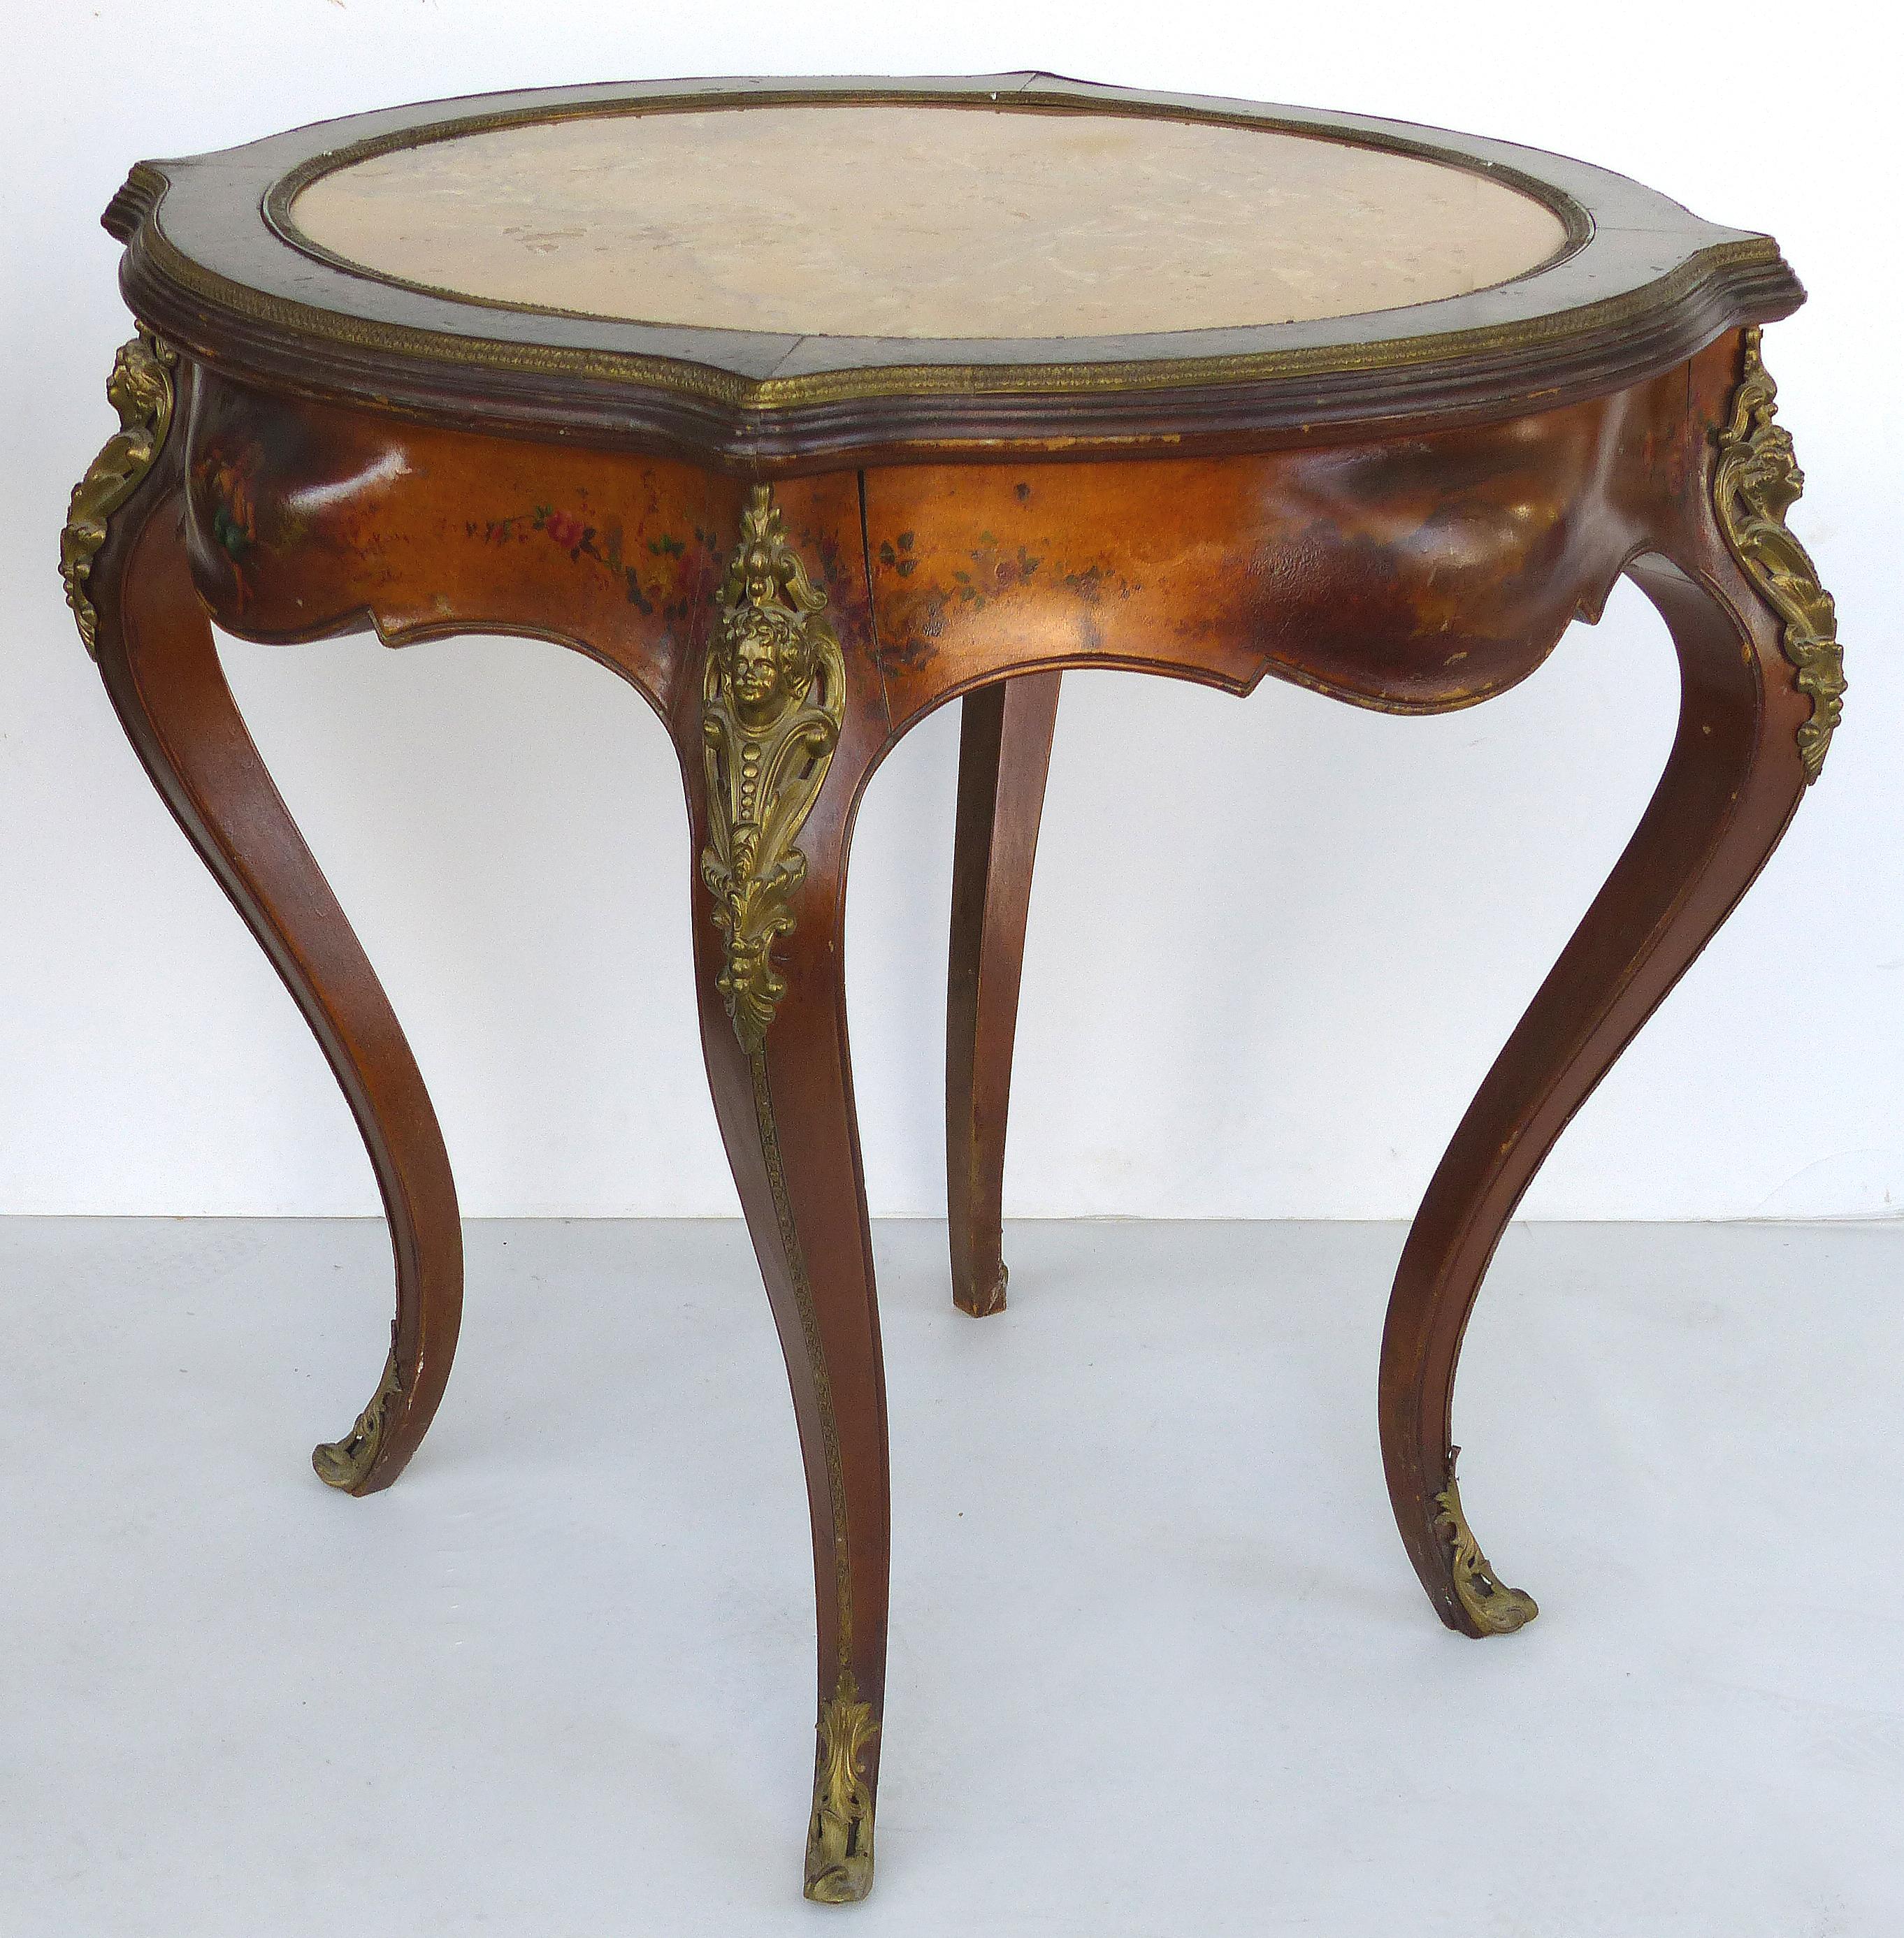 Vernis Martin Style Hand Painted Table

Offered for sale is an early 20th century Vernis Martin style side parlor or center table with hand-painted decoration, bronze mounts, and an inset Siena marble top. The inset marble top is trimmed in bronze